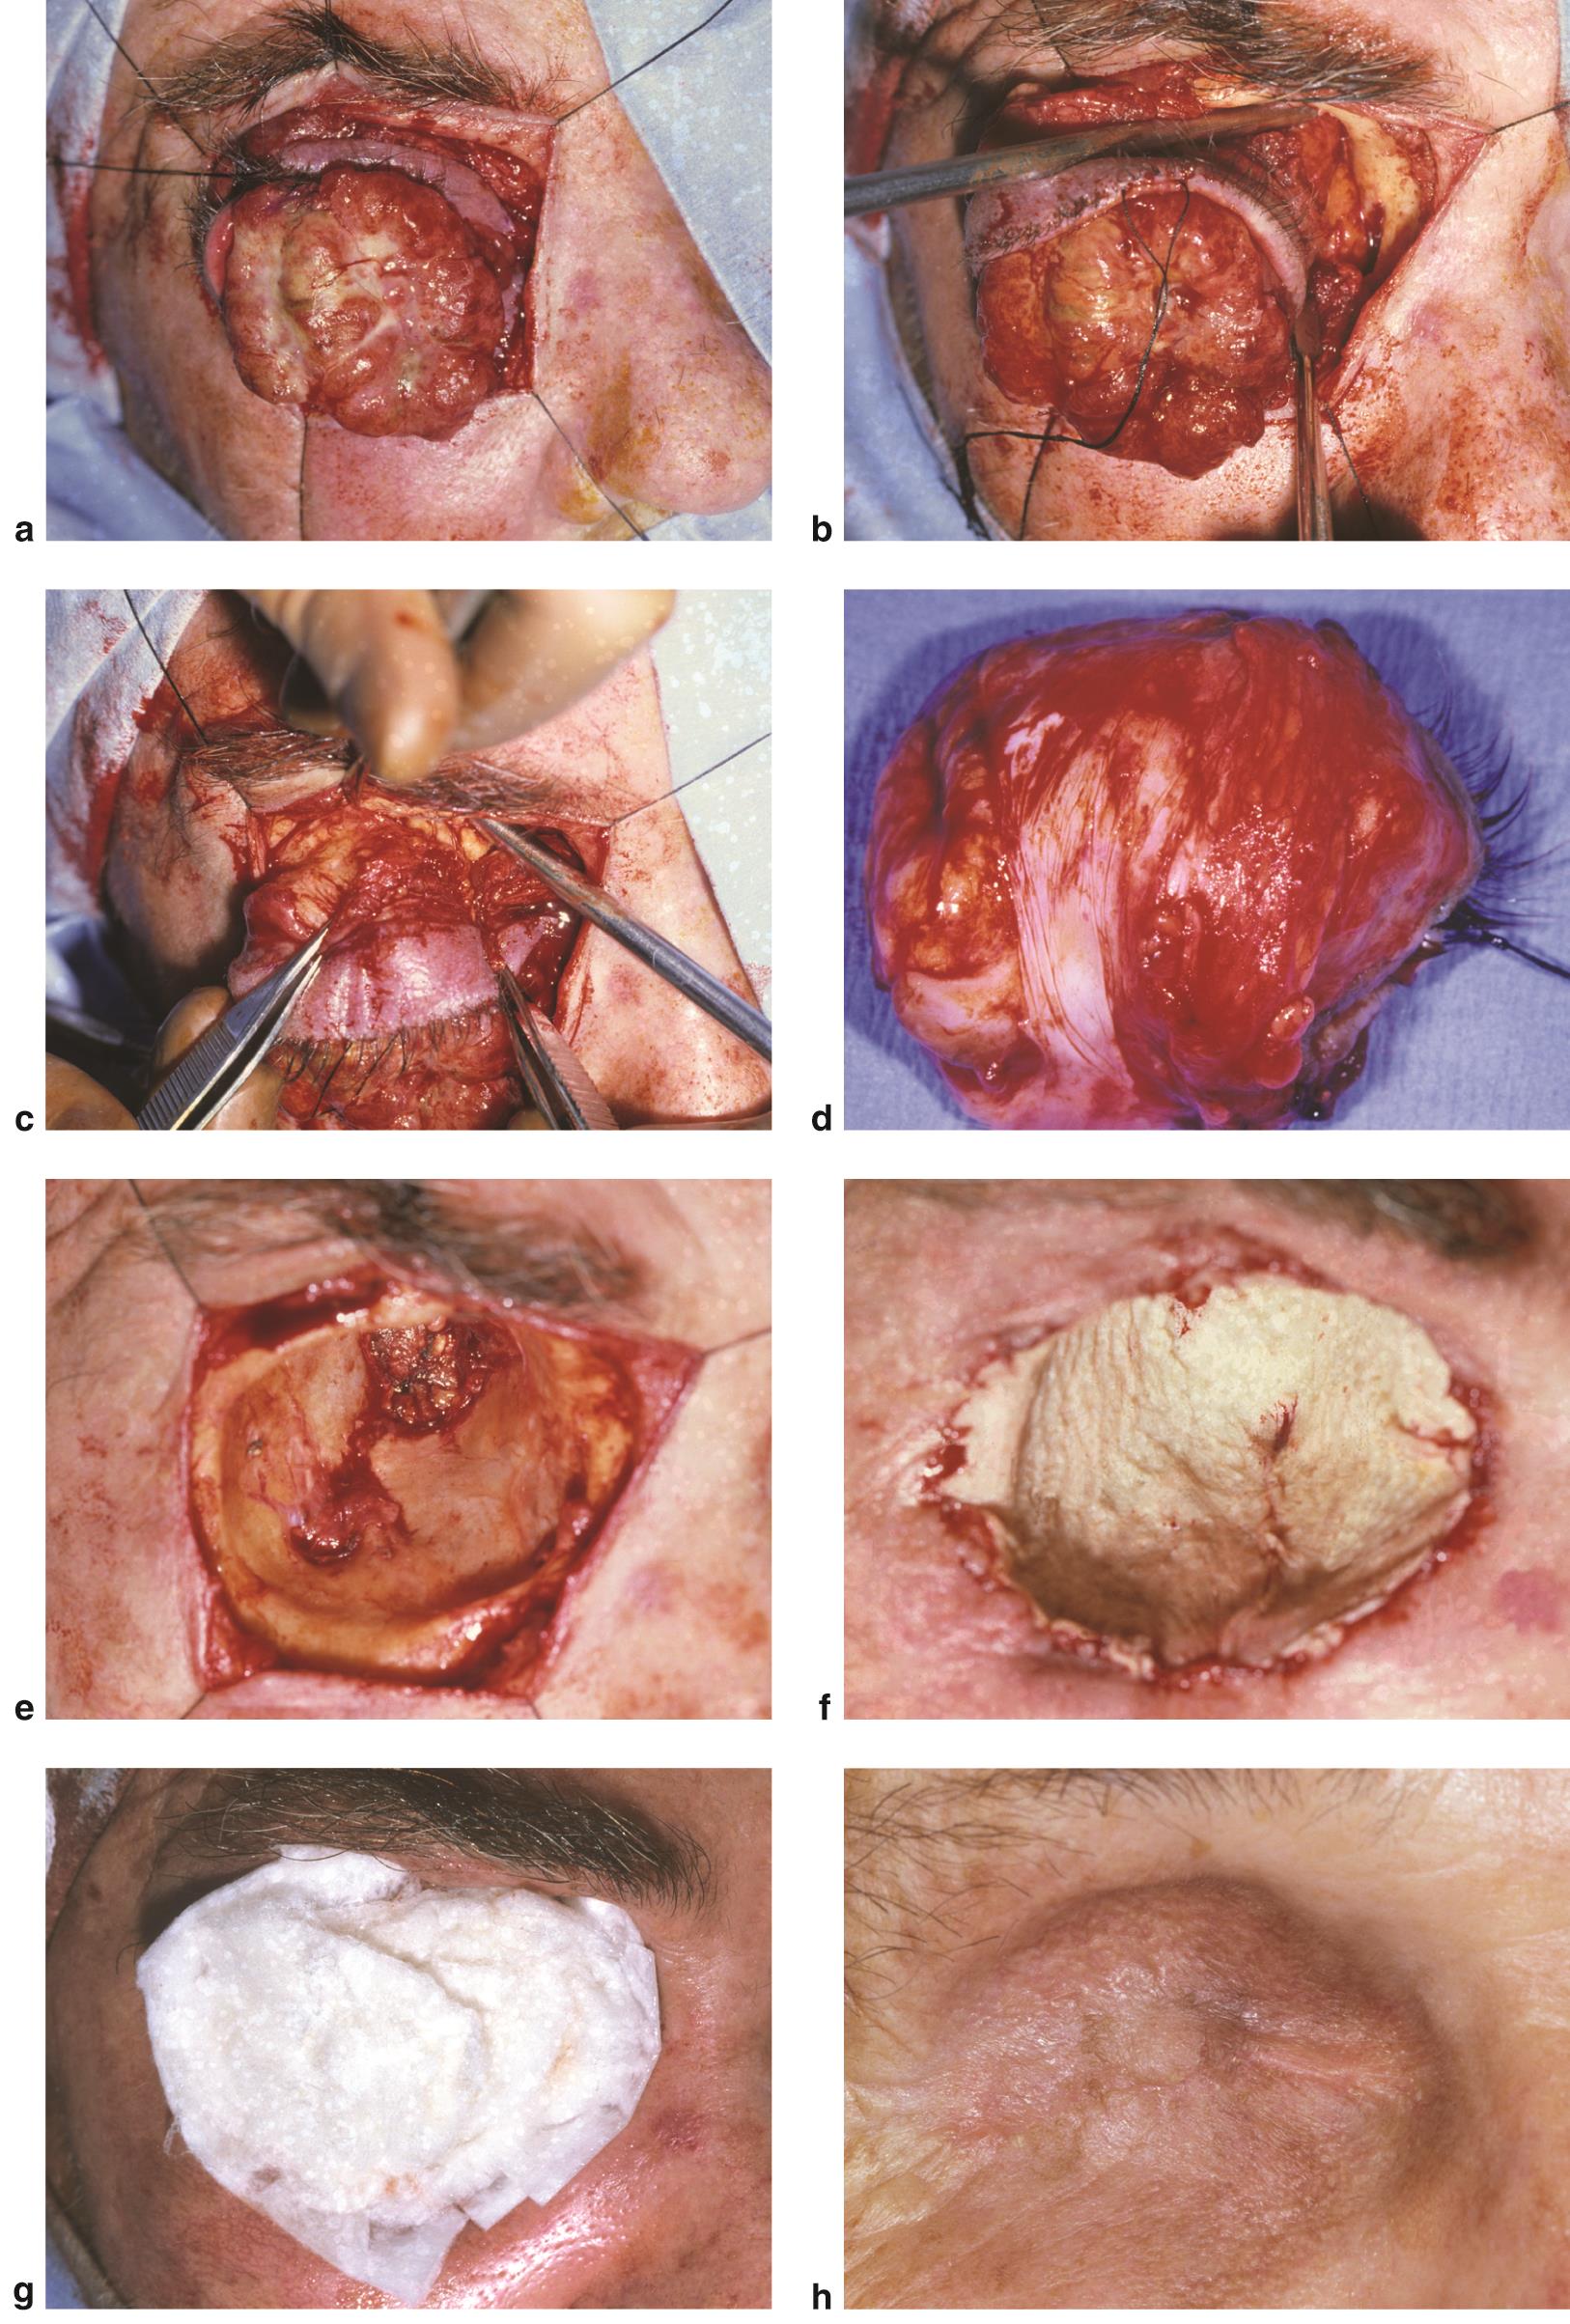 Steps in exenteration surgery - American Academy of Ophthalmology